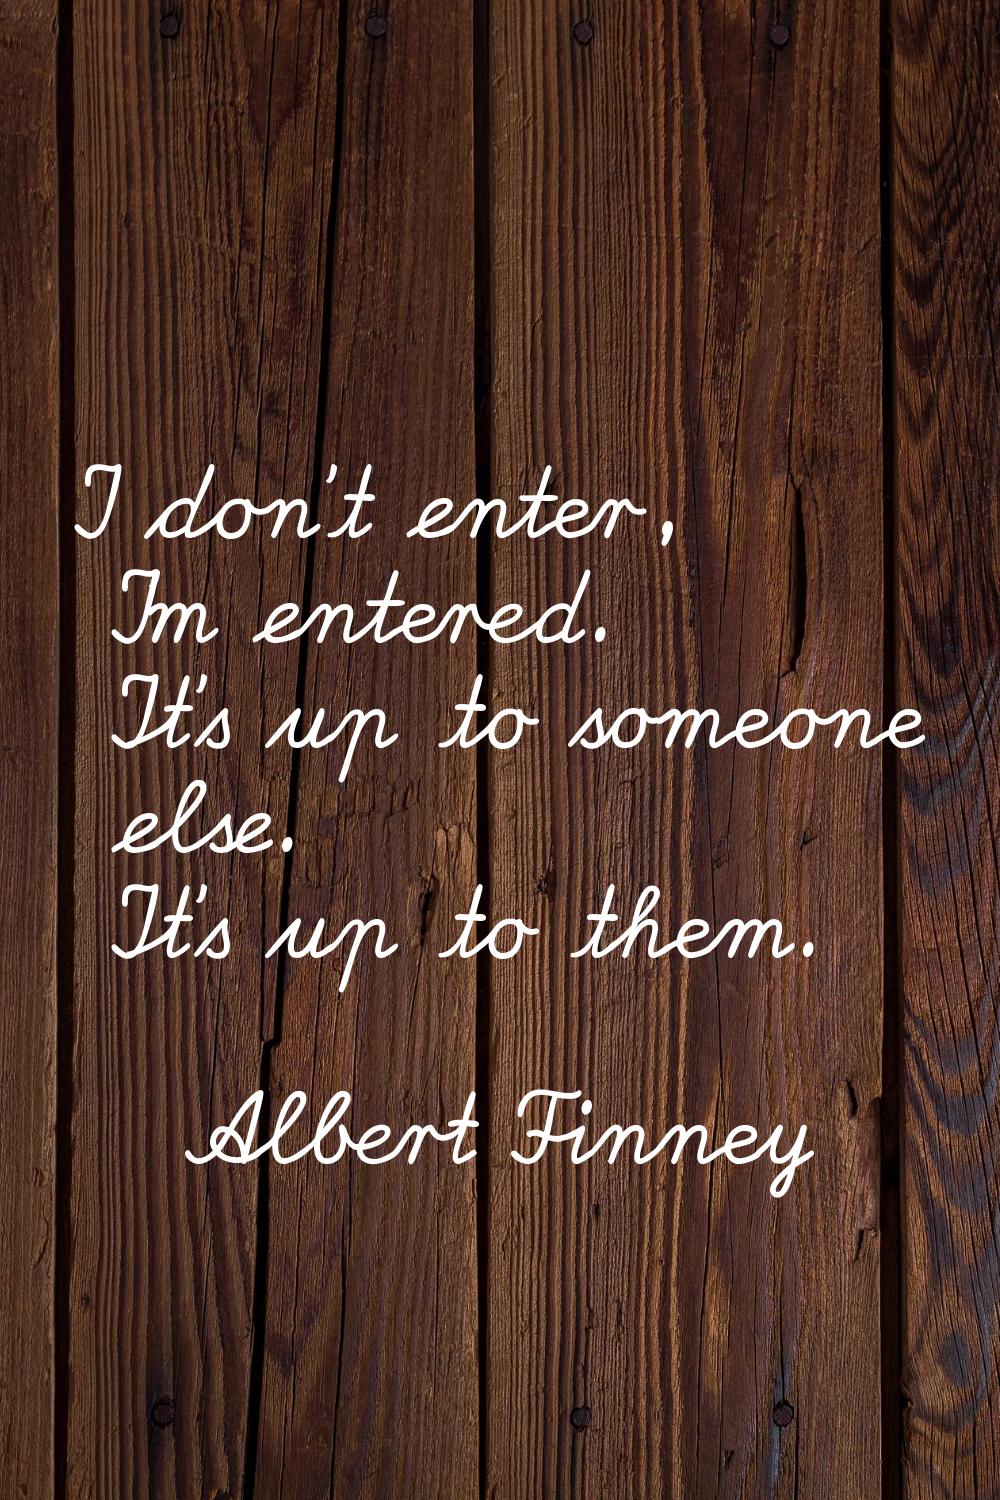 I don't enter, I'm entered. It's up to someone else. It's up to them.